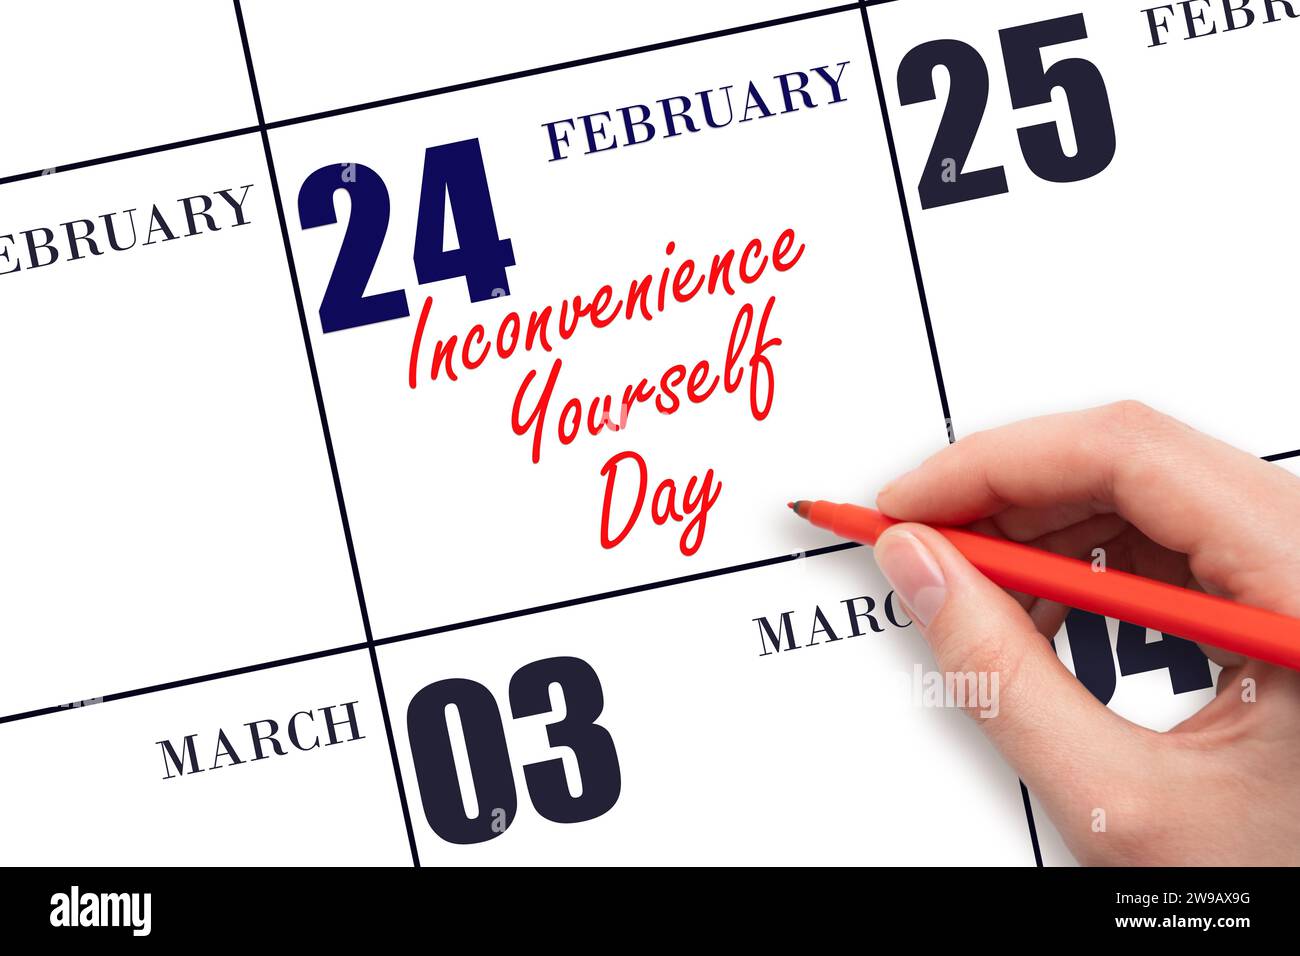 February 24. Hand writing text Inconvenience Yourself Day on calendar date. Save the date. Holiday. Day of the year concept. Stock Photo